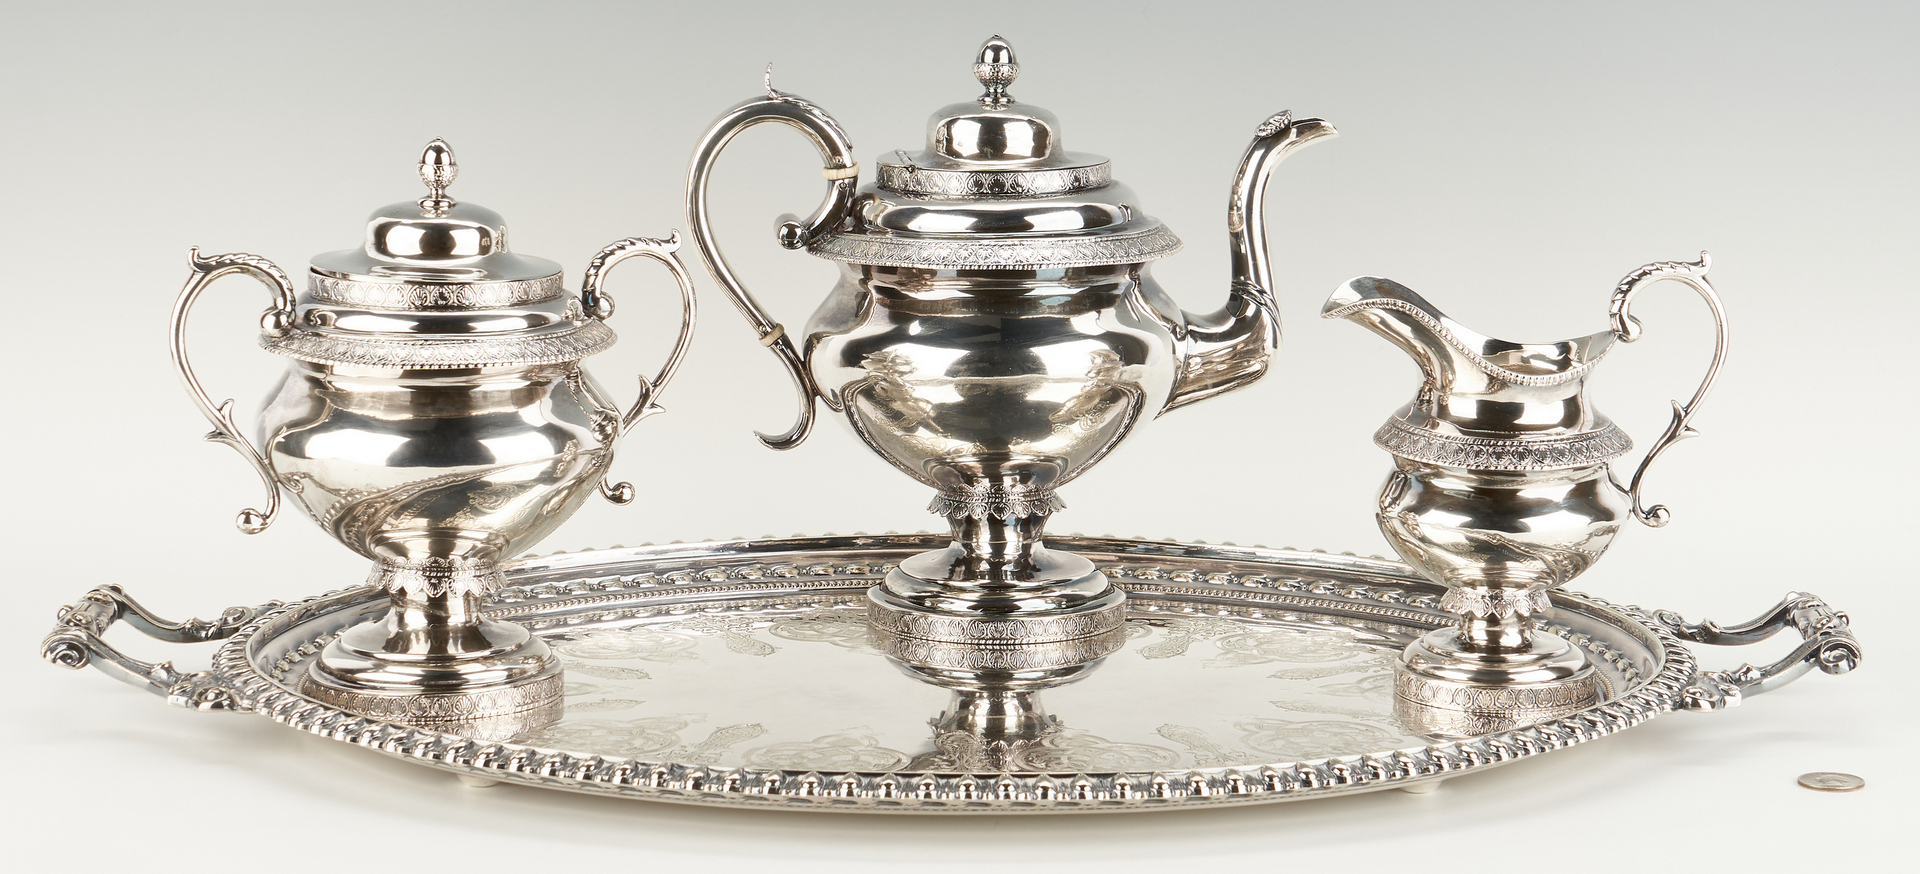 Lot 84: Anthony Rasch Coin Silver Tea Set attr. New Orleans